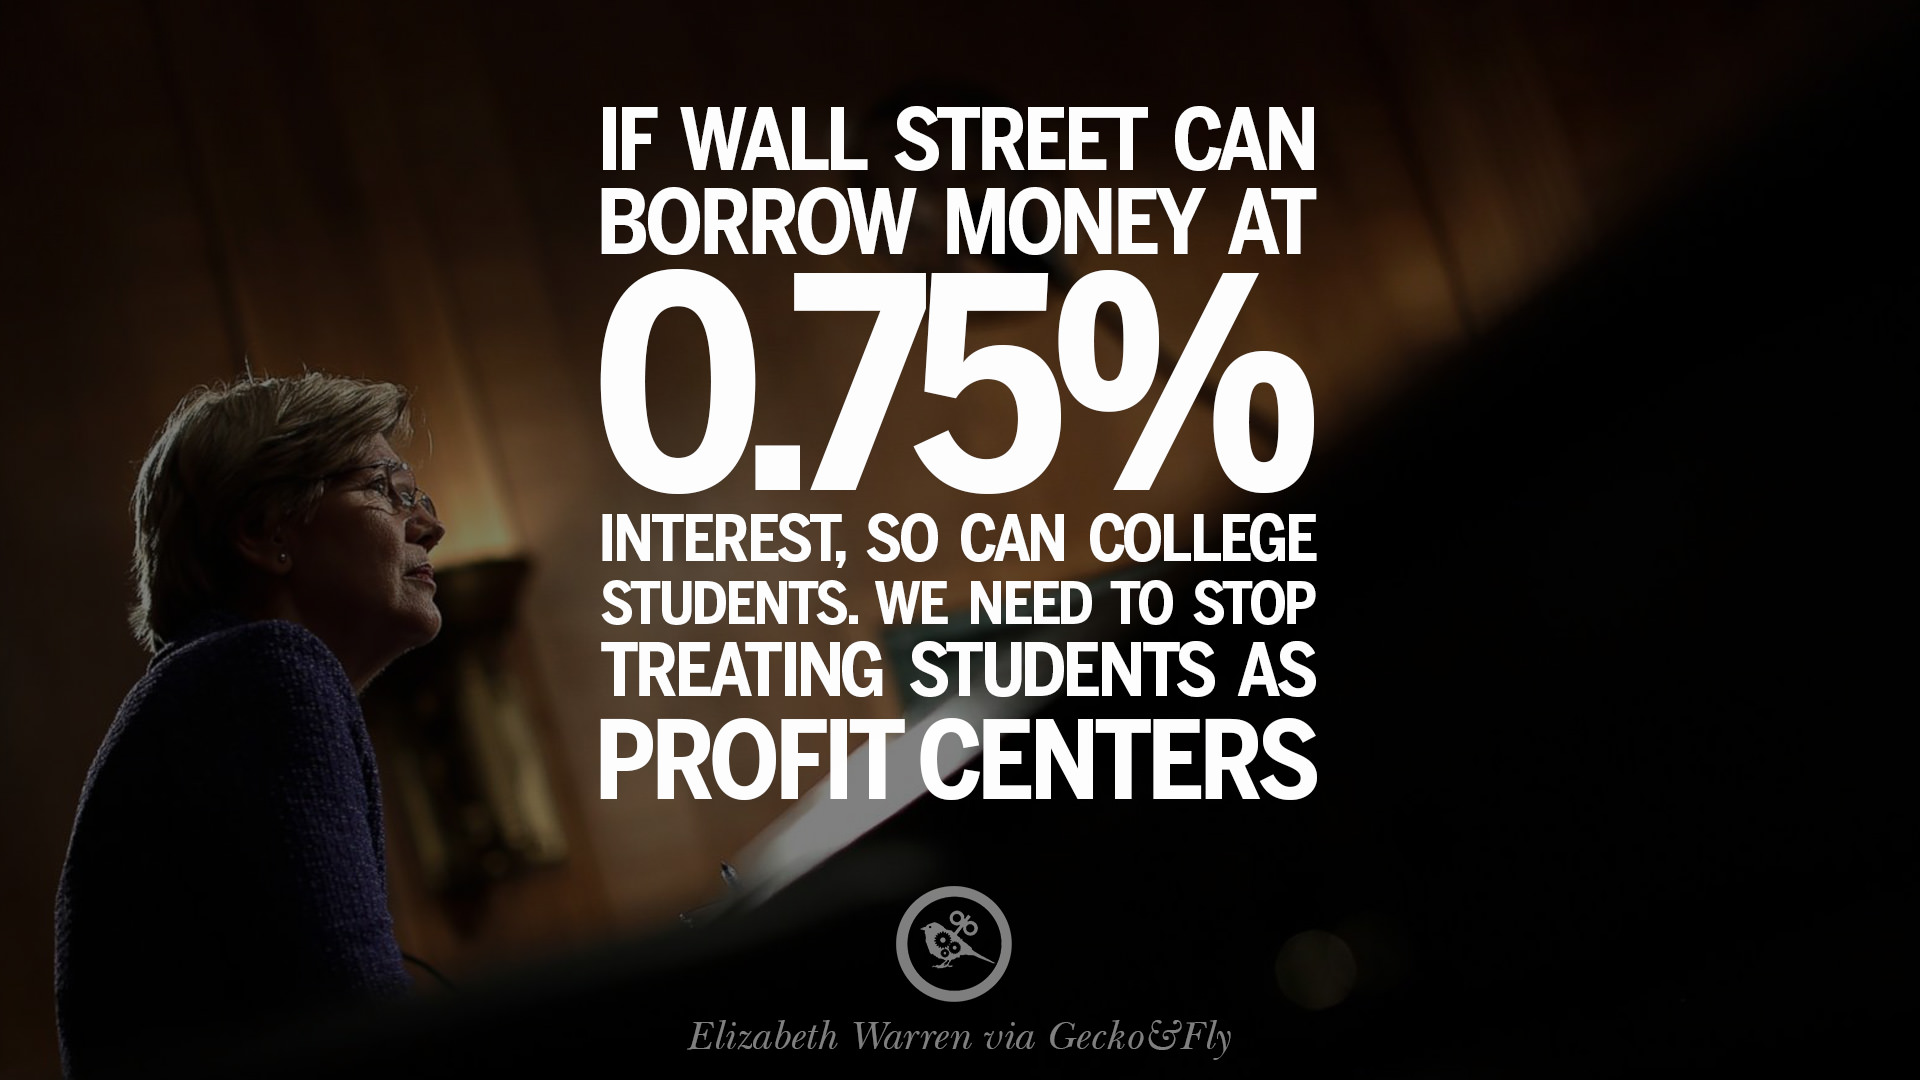 student-loans-education-debt-quotes-06.jpg